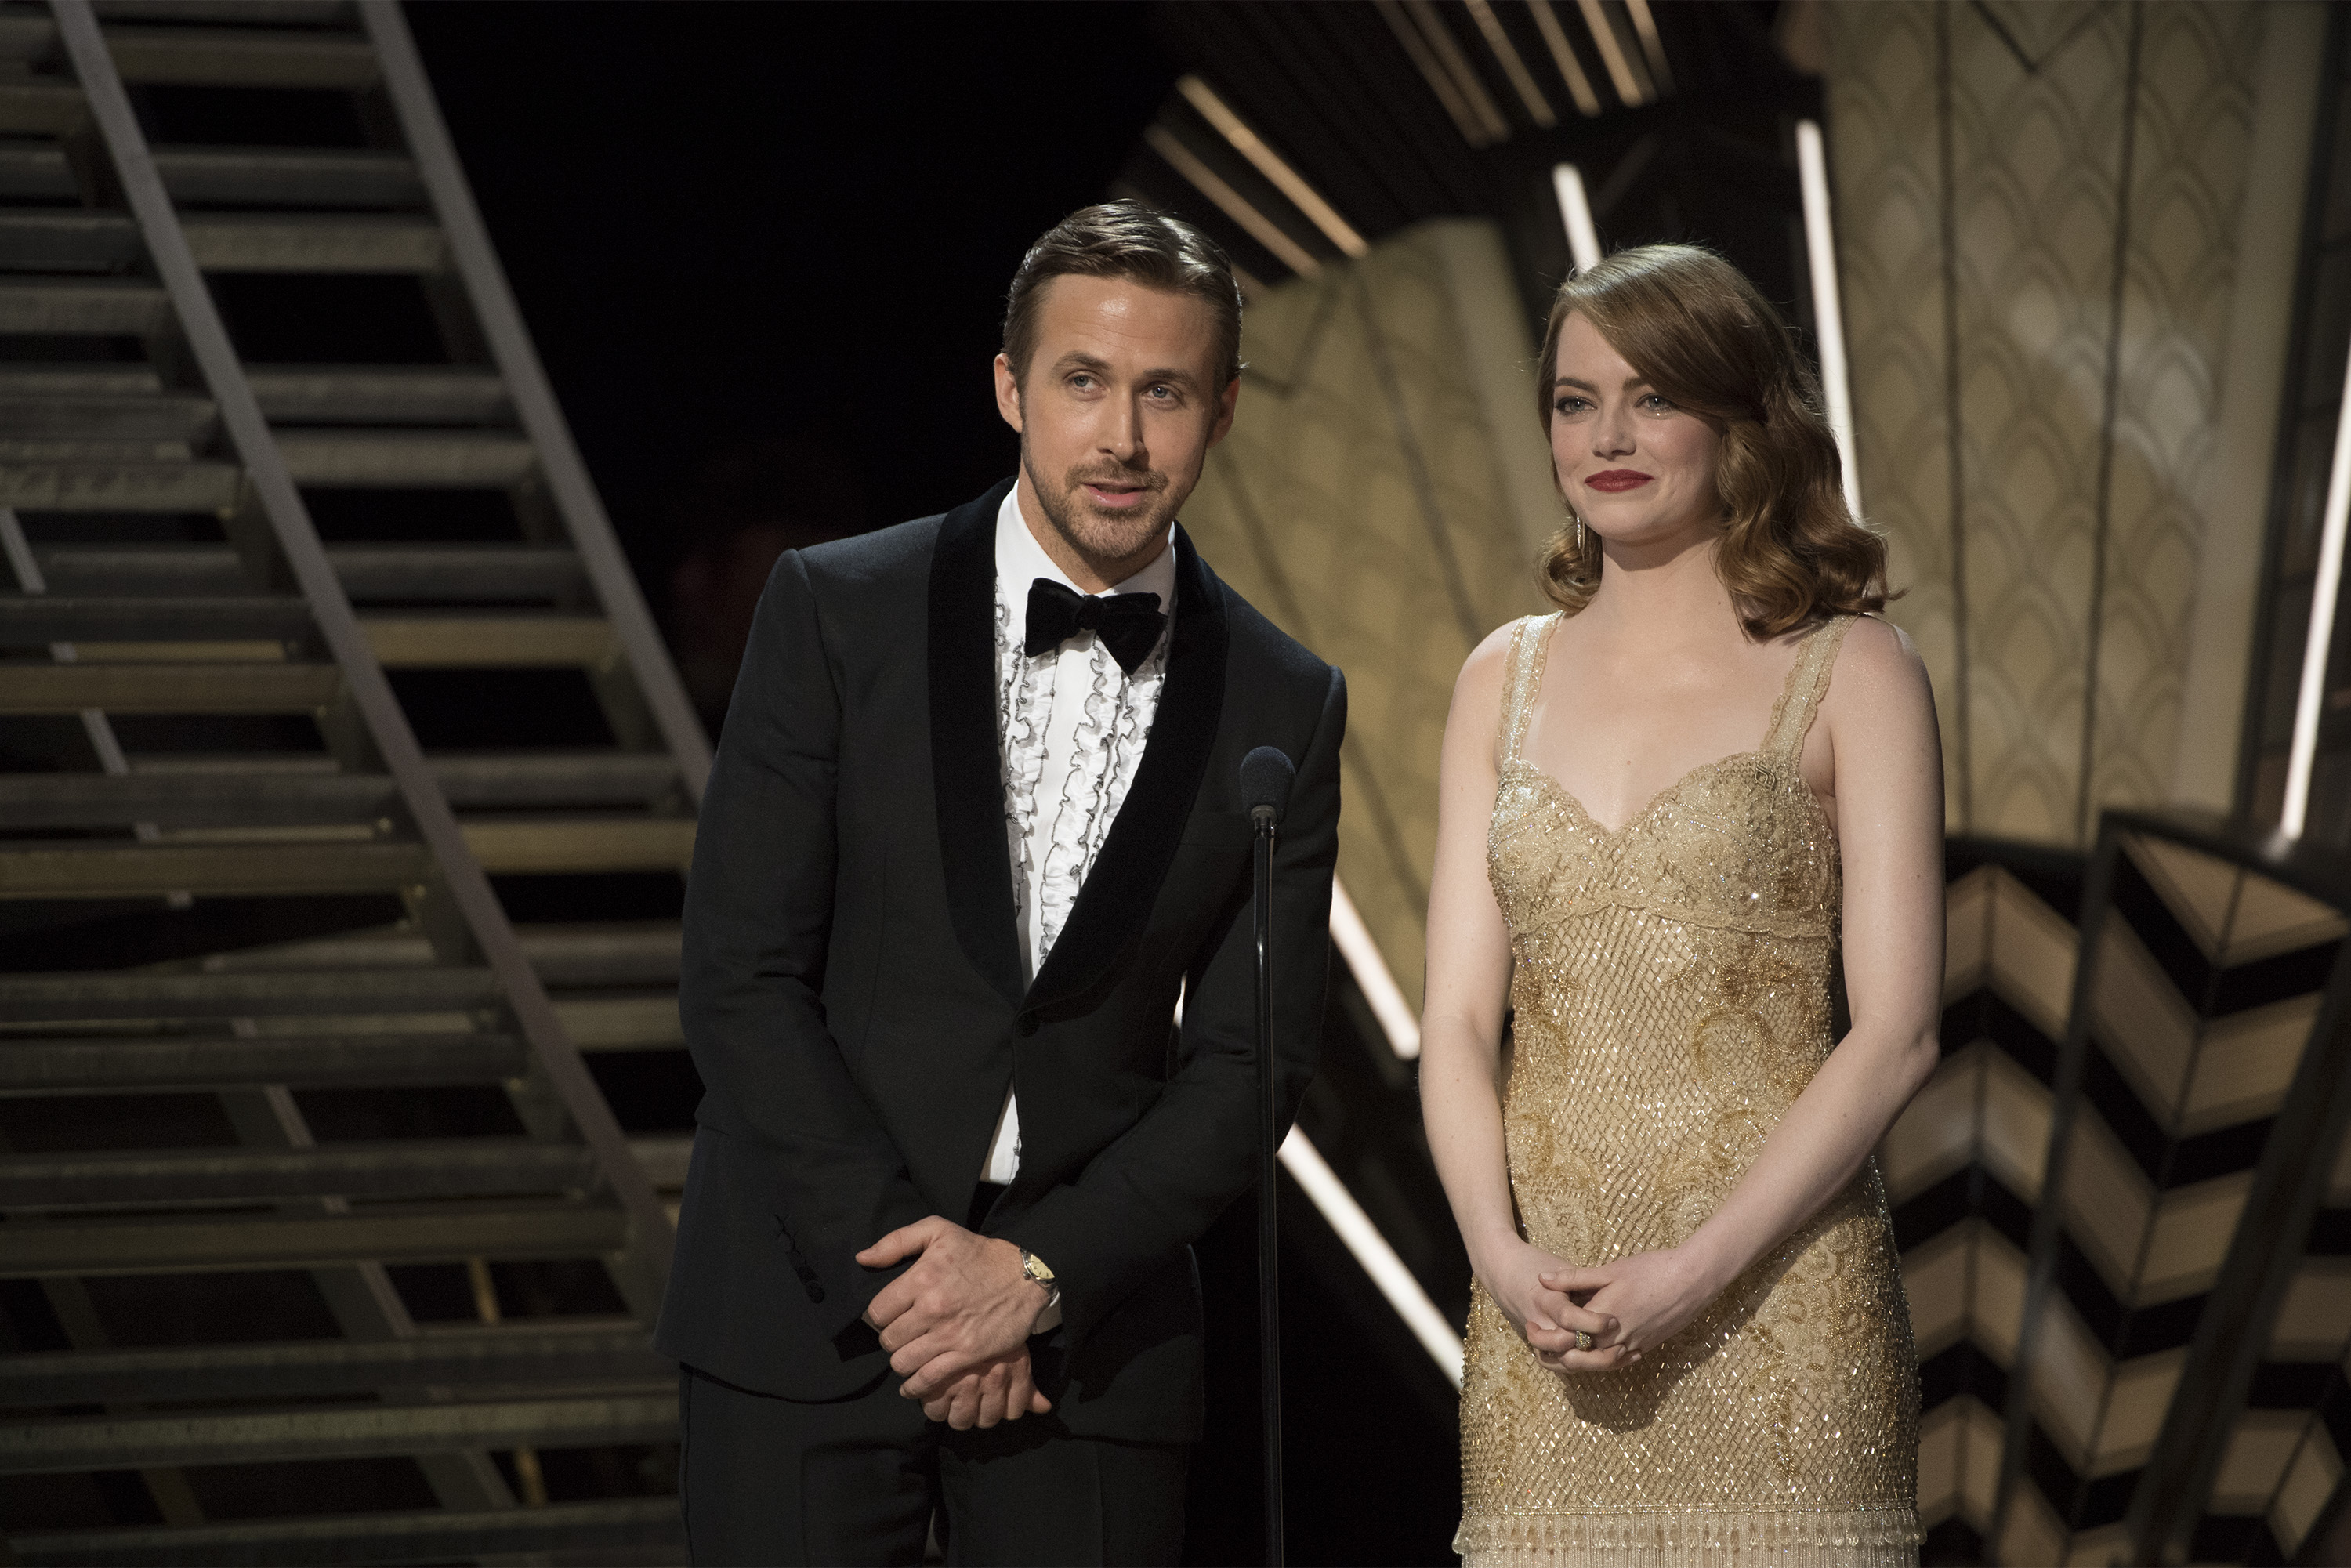 A Quick Reminder of the Movies Ryan Gosling and Emma Stone Have Costarred  In